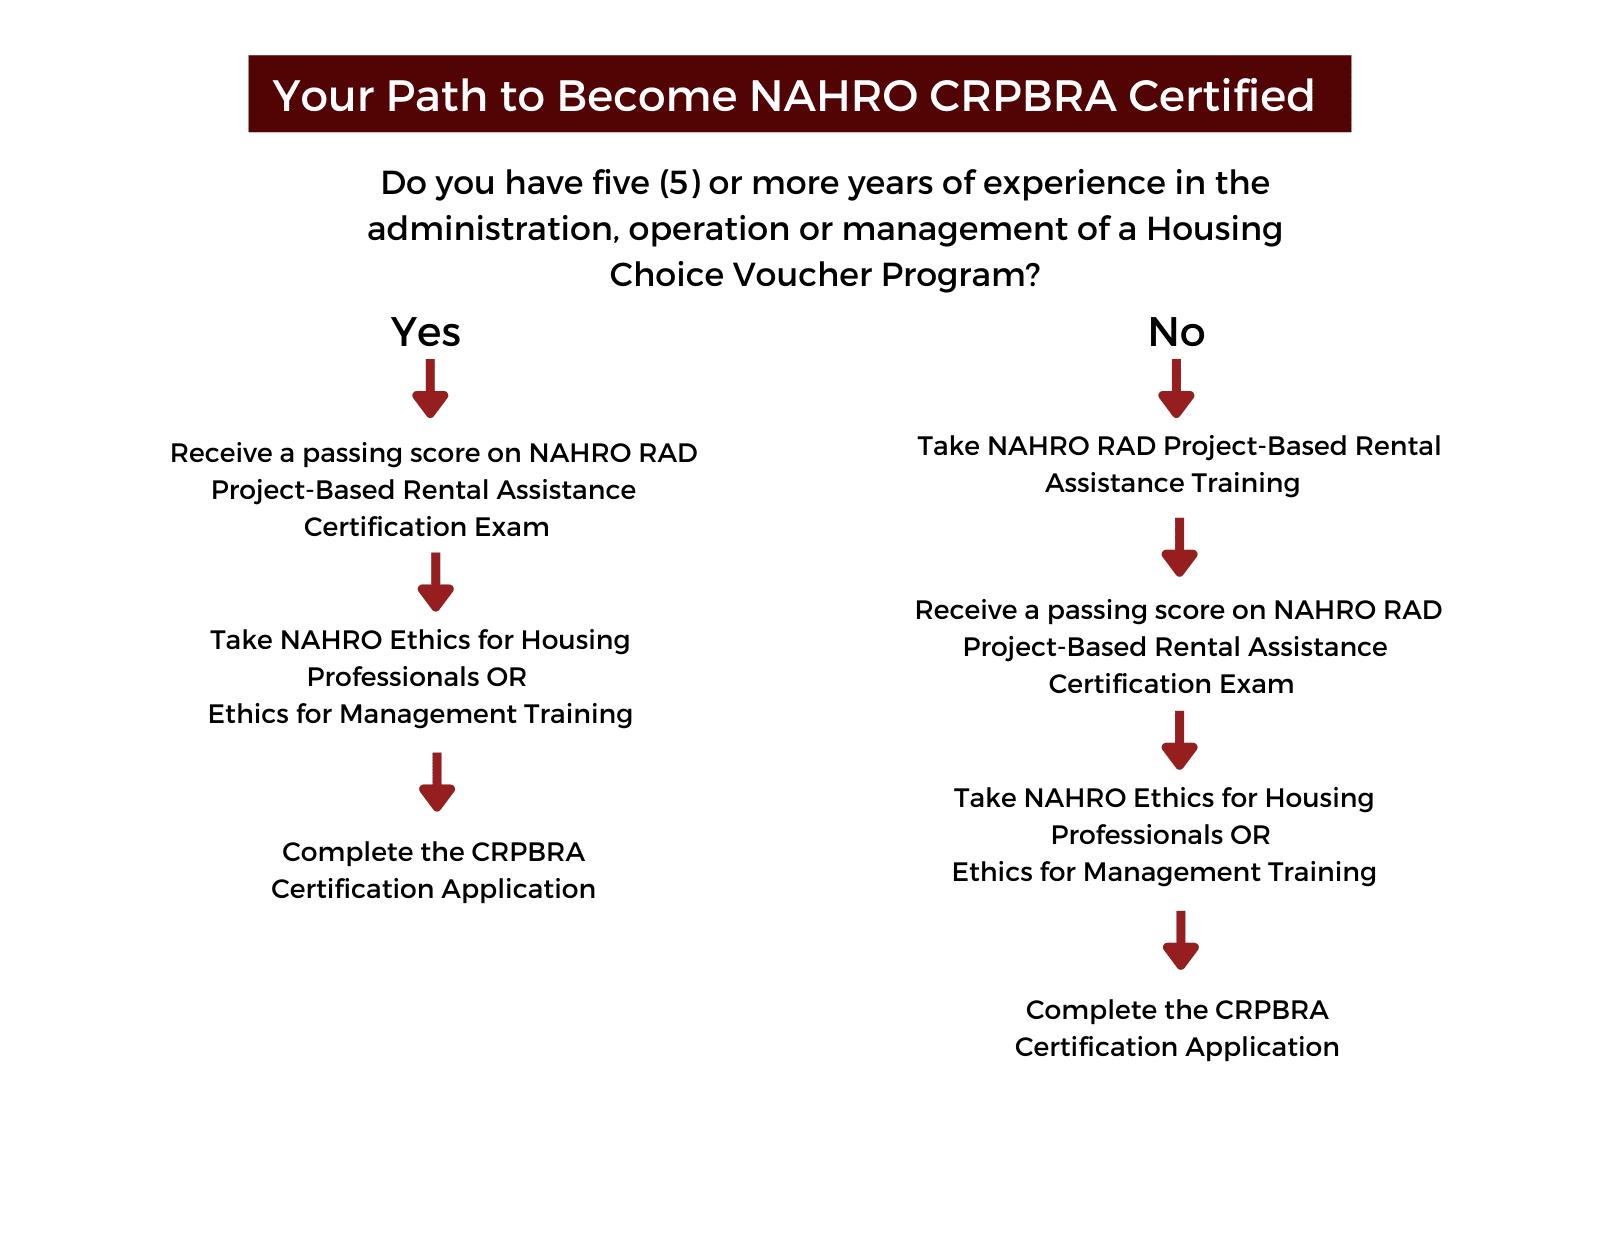 Your Path to Become NAHRO Certified Specialist RAD Project Based Rental Assistance (CRPBRA) Flow Chart  There are two paths to become NAHRO CRPBRA Certified.  Path 1: If you do not have five or more years of experience working in the administration, operation, or management of a Housing Choice Voucher Program, you are required to take either the NAHRO RAD Project-Based Rental Assistance Training. This path also requires you to receive a passing score on the NAHRO RAD Project-Based Rental Assistance Certification Exam, take NAHRO Ethics for Housing Professionals or Ethics for Management Training and Complete the CRPBRA Certification Application.  Path 2: If you have five or more years of experience working in the administration, operation, or management of a Housing Choice Voucher Program, you may forgo the NAHRO RAD Project-Based Rental Assistance Training. This path still requires you to receive a passing score on RAD Project-Based Rental Assistance Certification Exam, take NAHRO Ethics for Housing Professionals or Ethics for Management Training, and Complete the CRPBRA Certification Application.